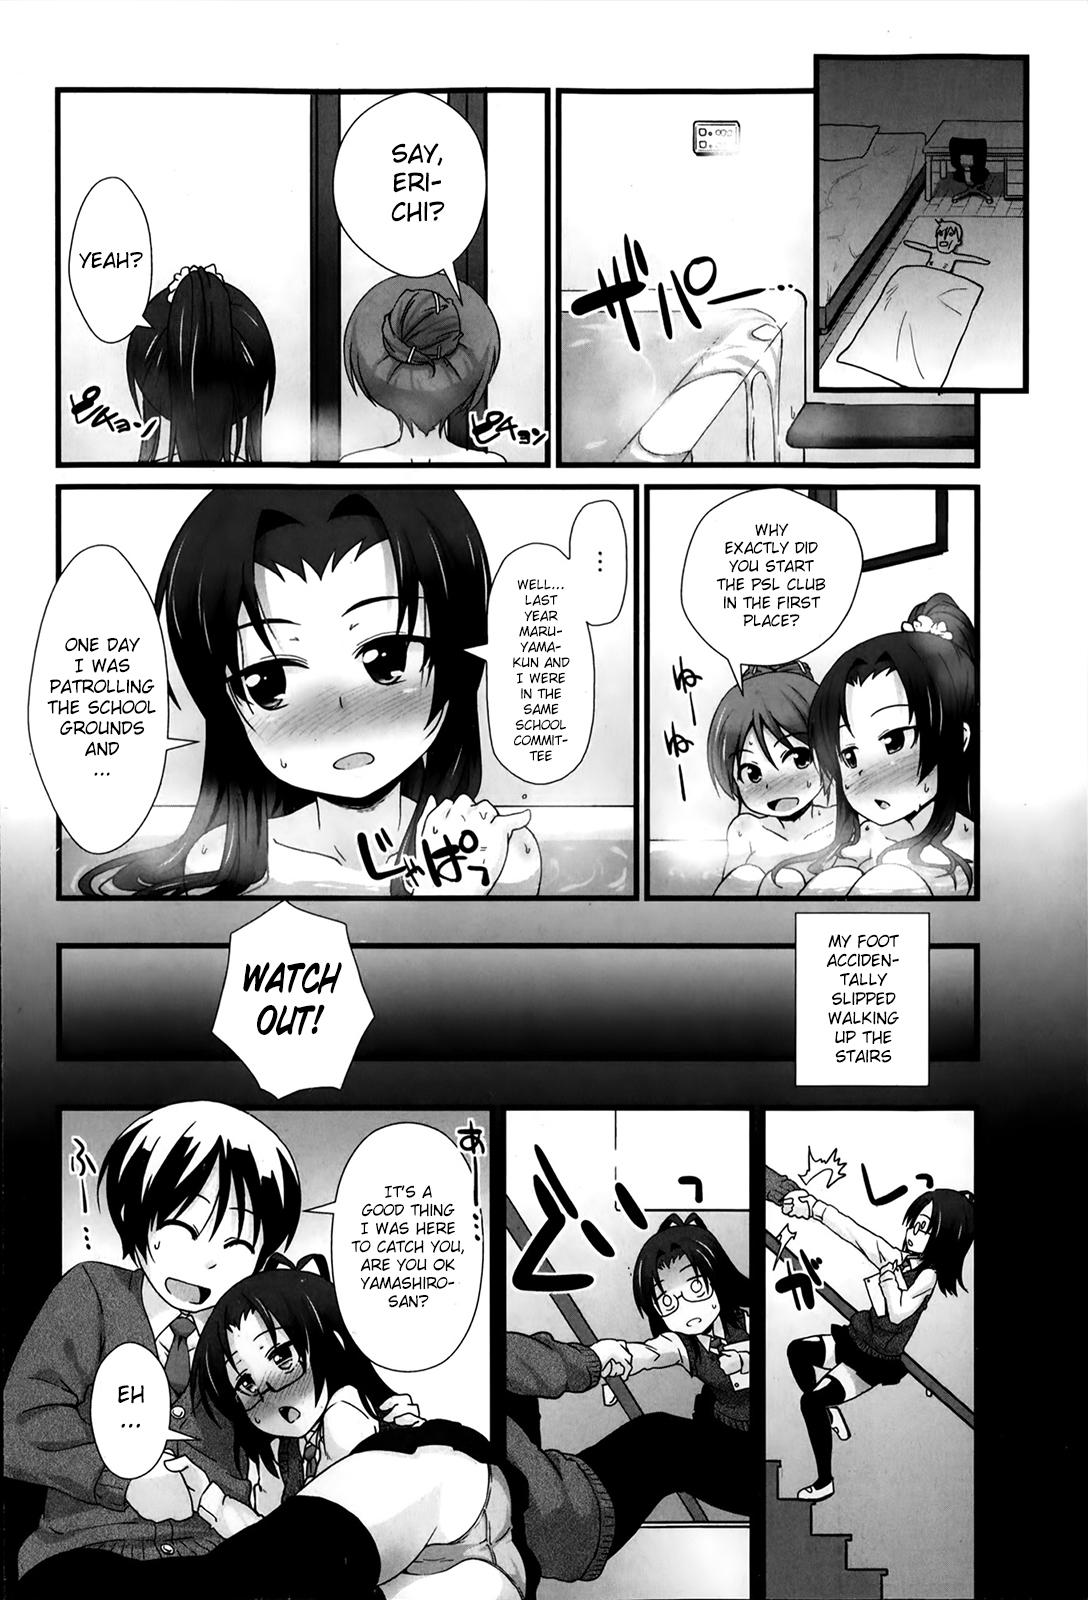 Free Rough Porn PSL-bu e Youkoso | Welcome to the PSL Club All Natural - Page 60